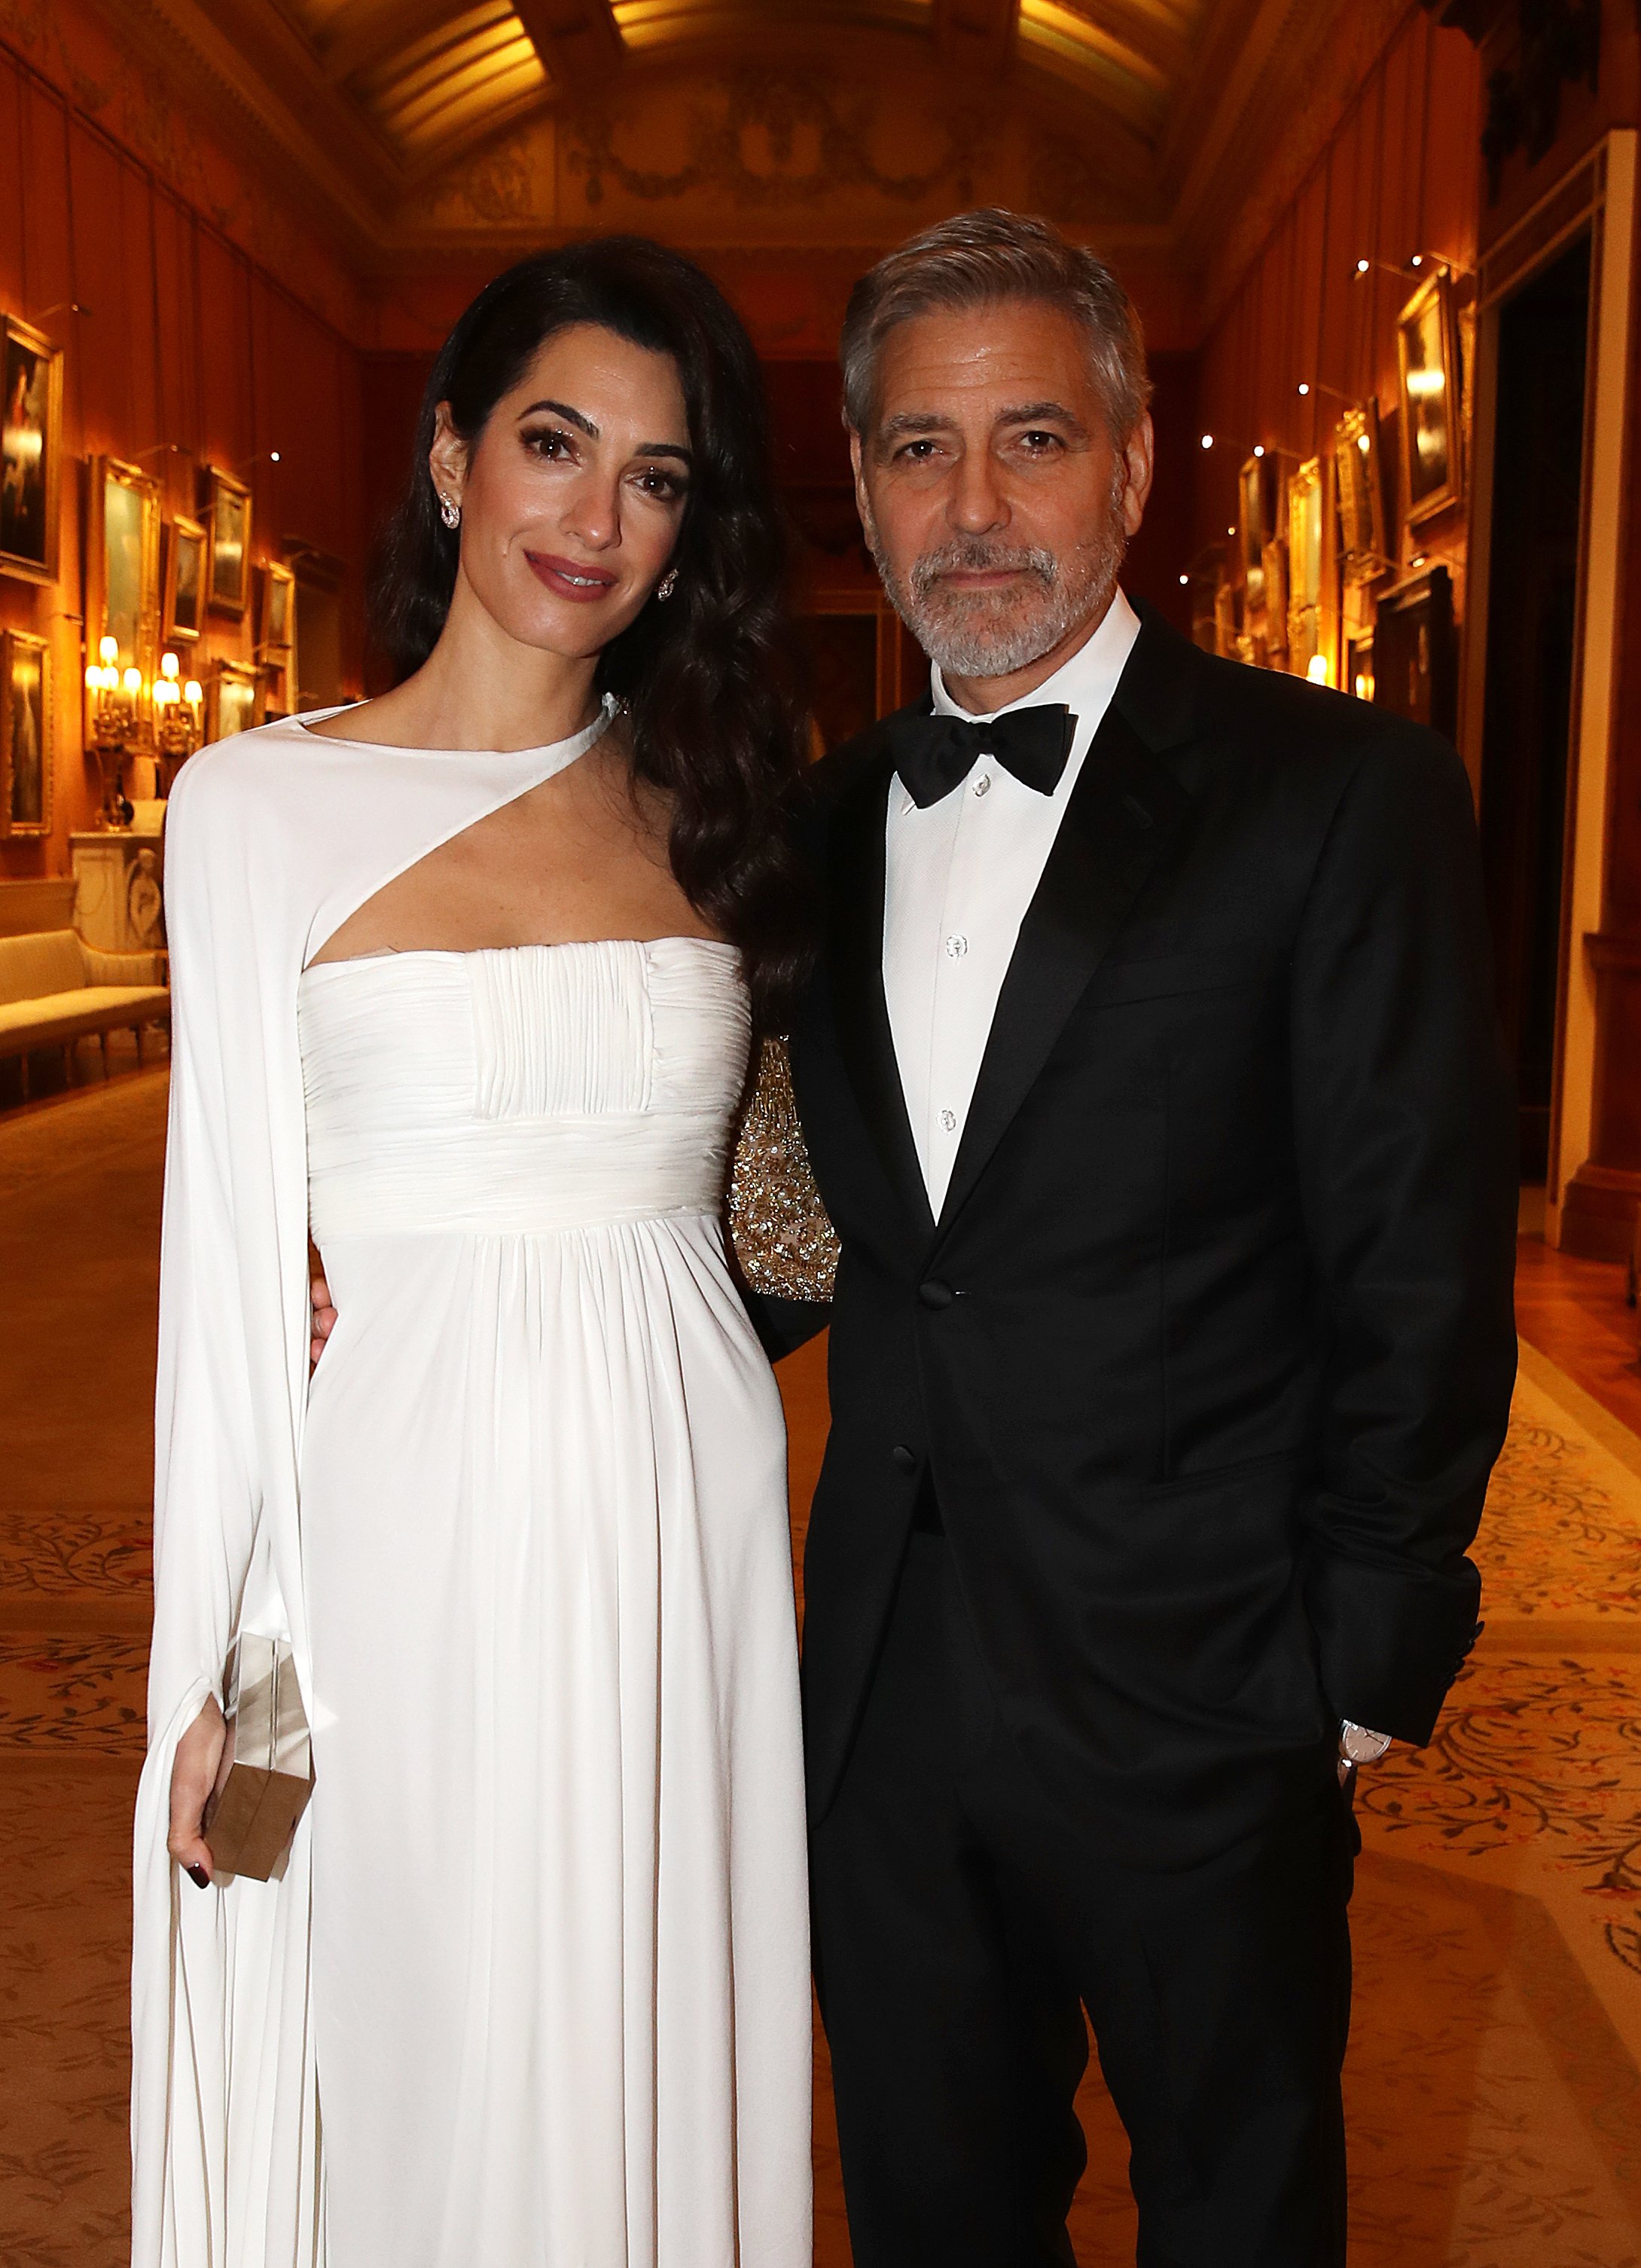 Human Rights Attorney Amal Clooney and George Clooney during a dinner celebration of The Prince's Trust at Buckingham Palace on March 12, 2019 in London, England. / Source: Getty Images